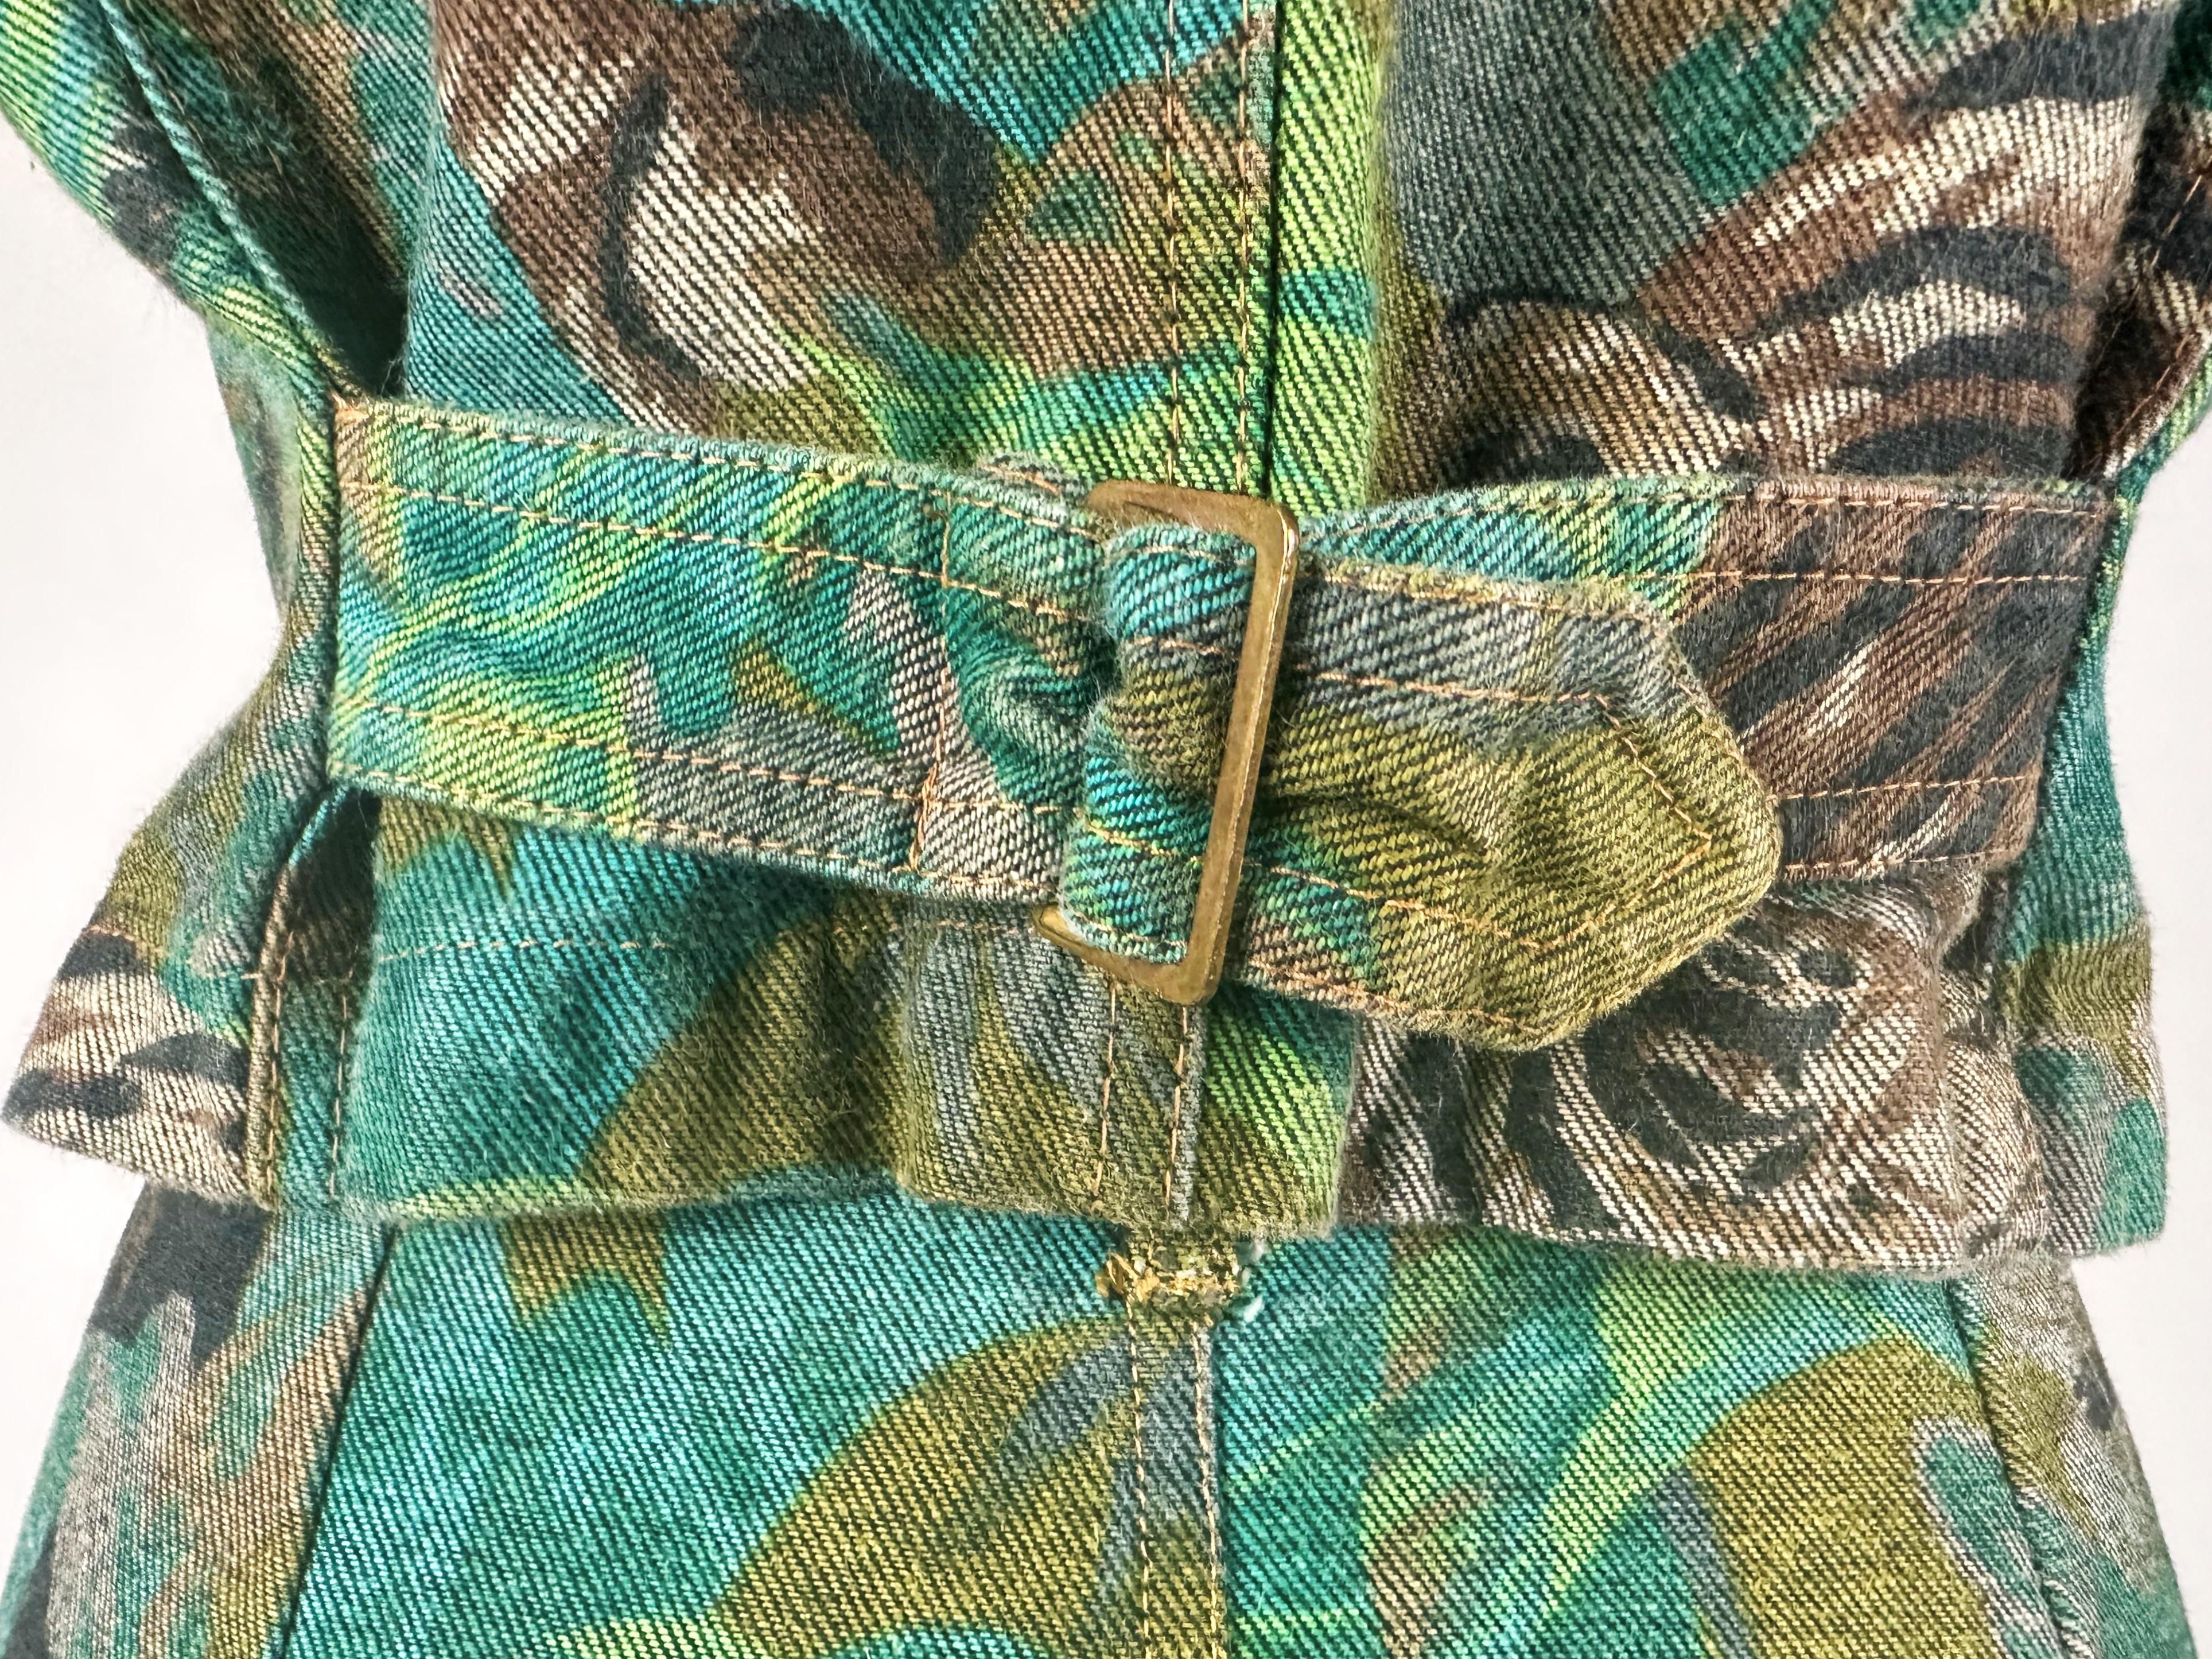 Jacket and Skirt by Kenzo Takada, Jungle & Tiger Print on Denim - French C. 1990 For Sale 3